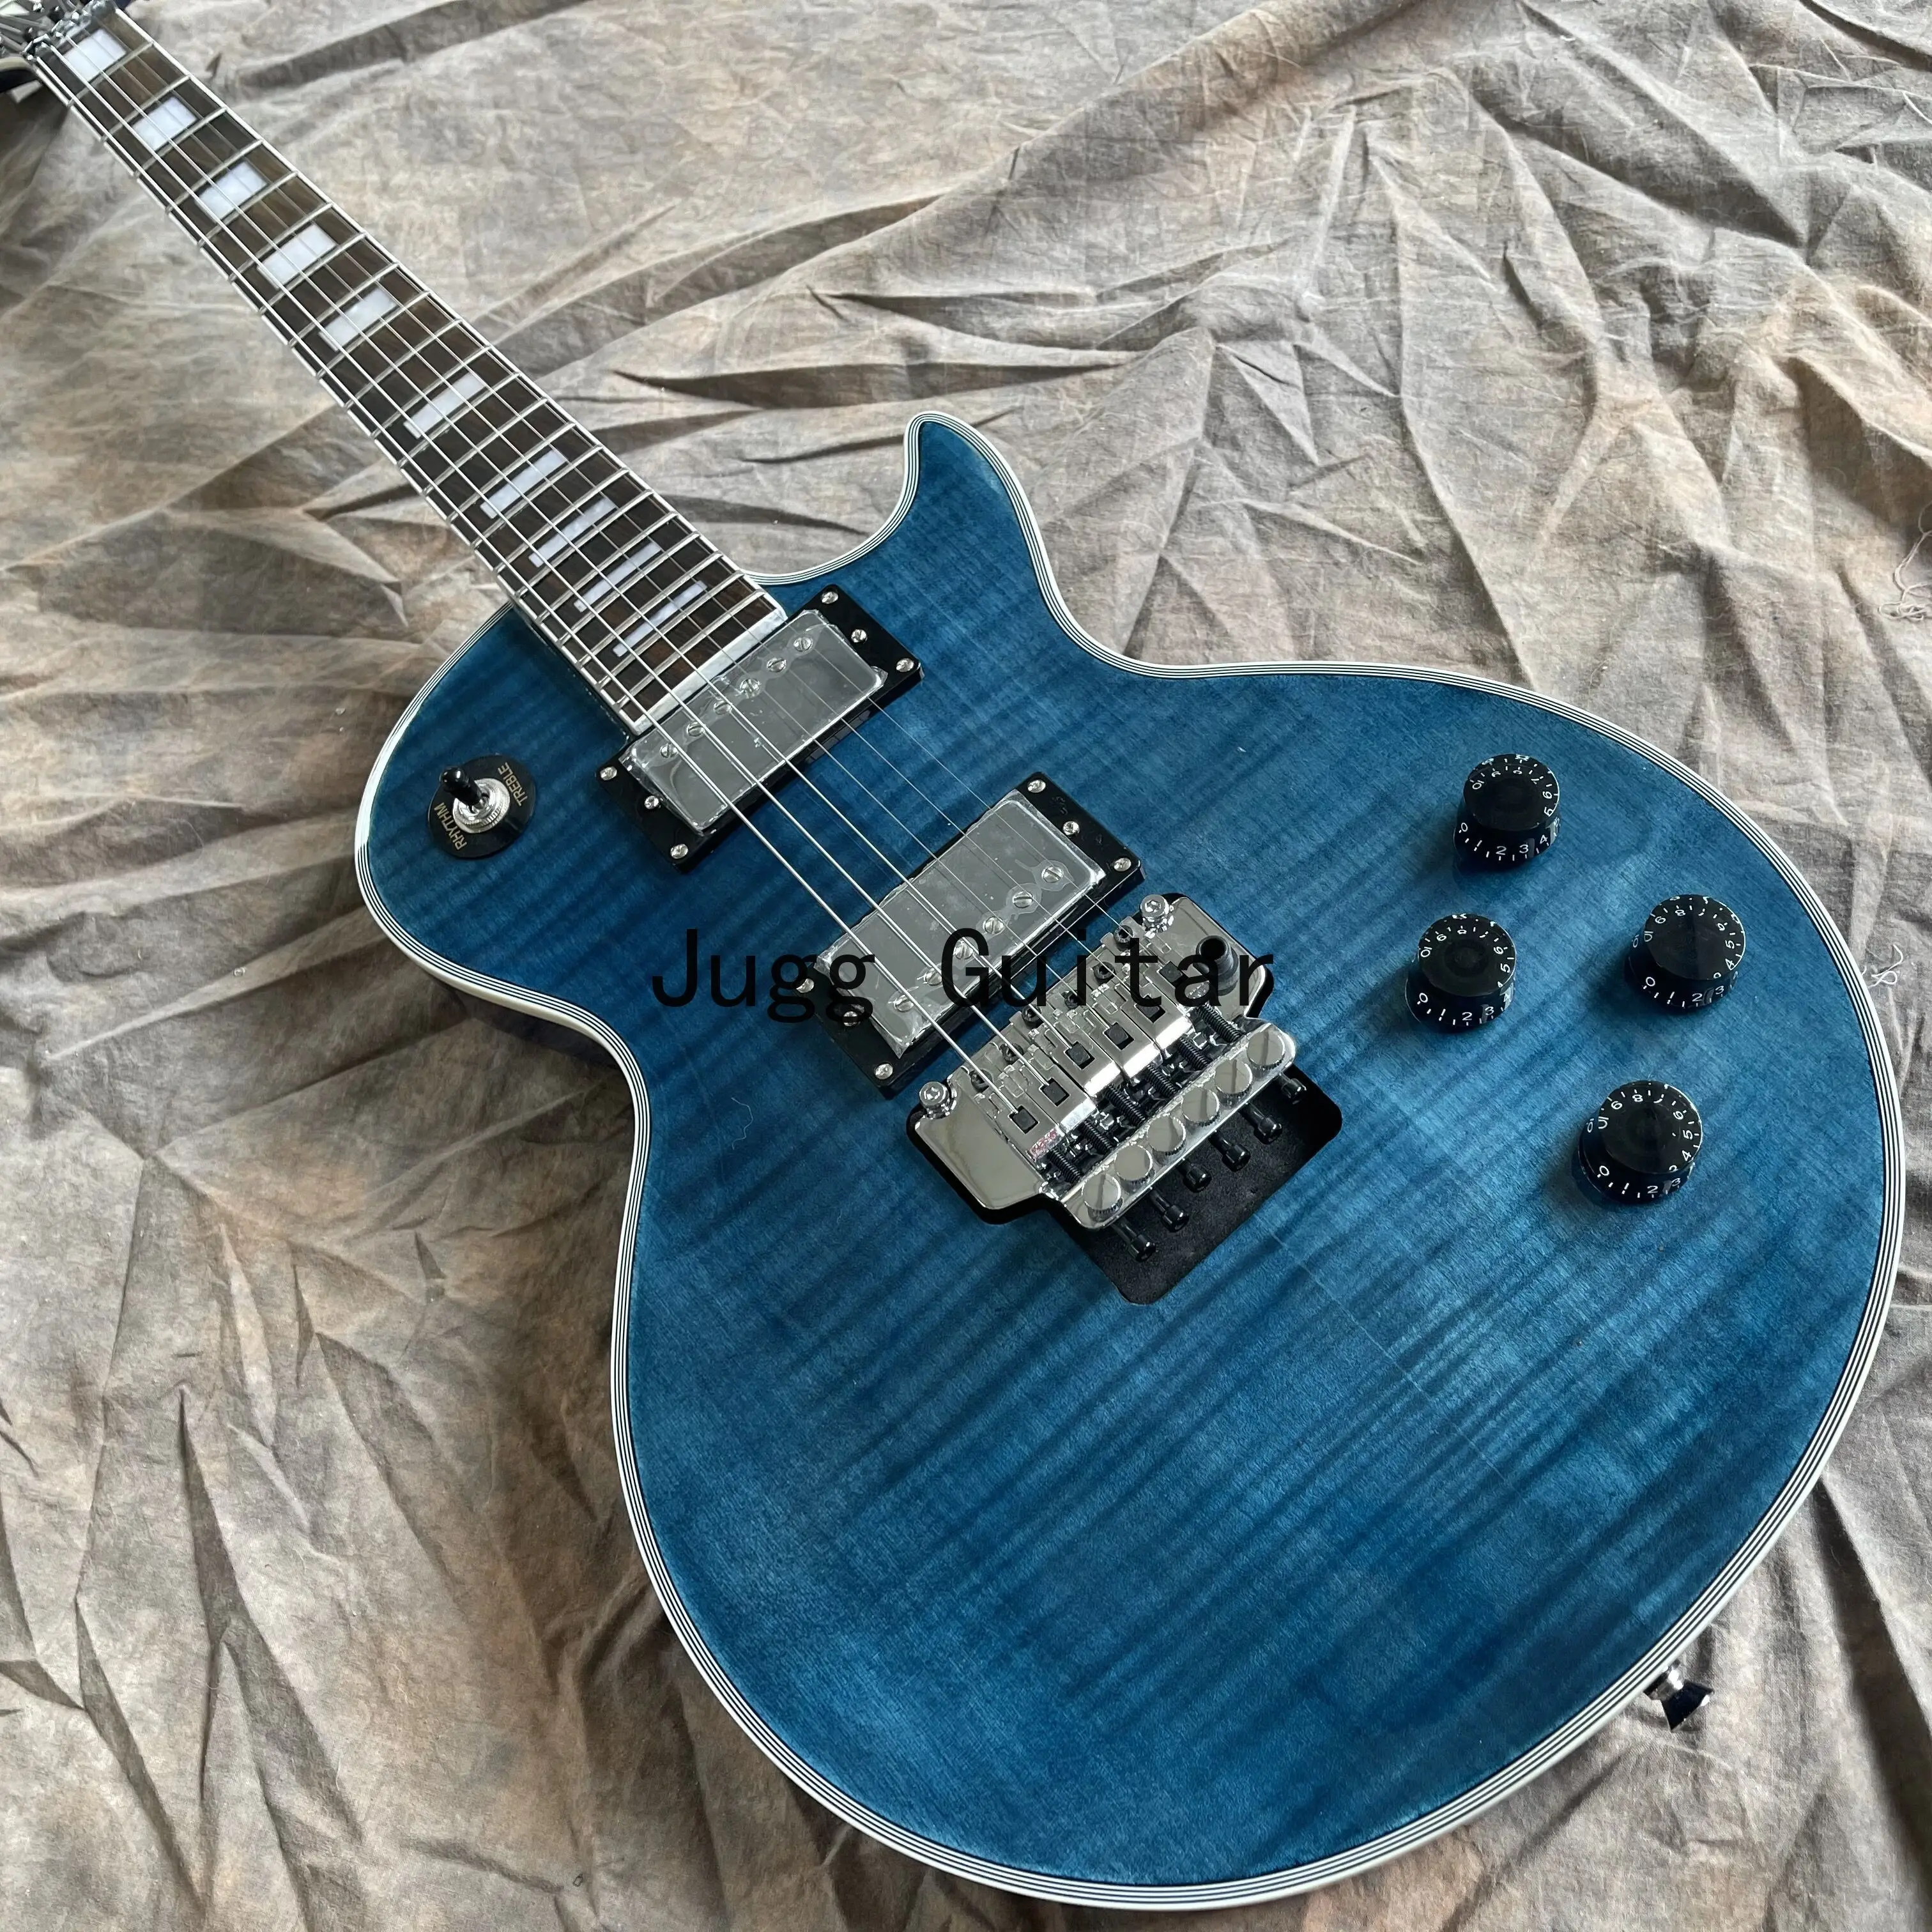 

Alex Lifeson Blue Quilted Maple Top Electric Guitar Axcess Carved Neck Joint Floyd Rose Tremolo Bridge, Belly Cut Contour